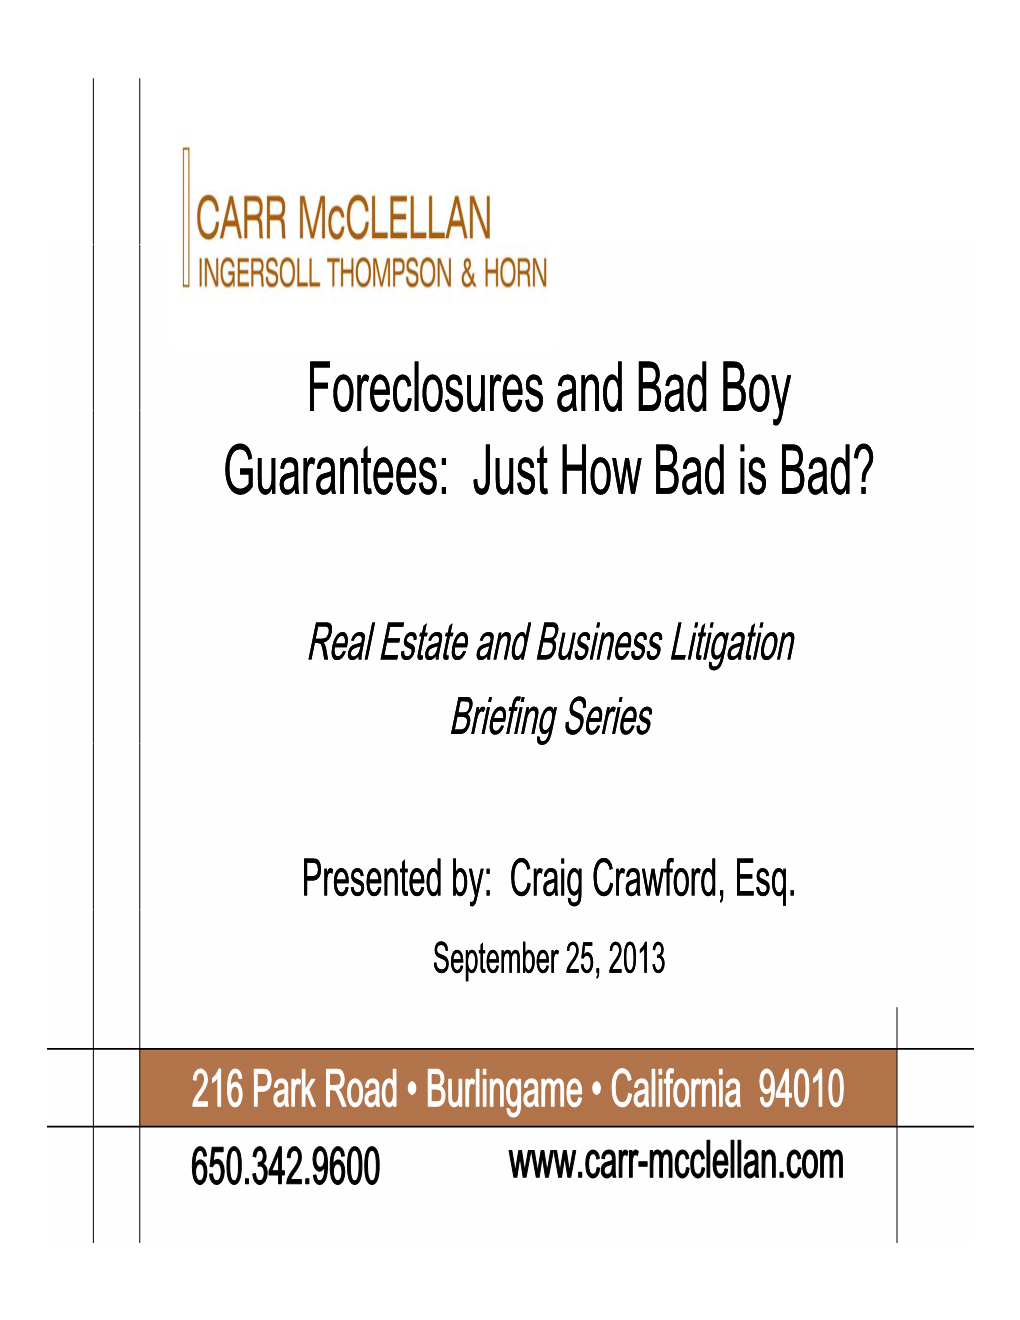 Foreclosures and Bad Boy Foreclosures